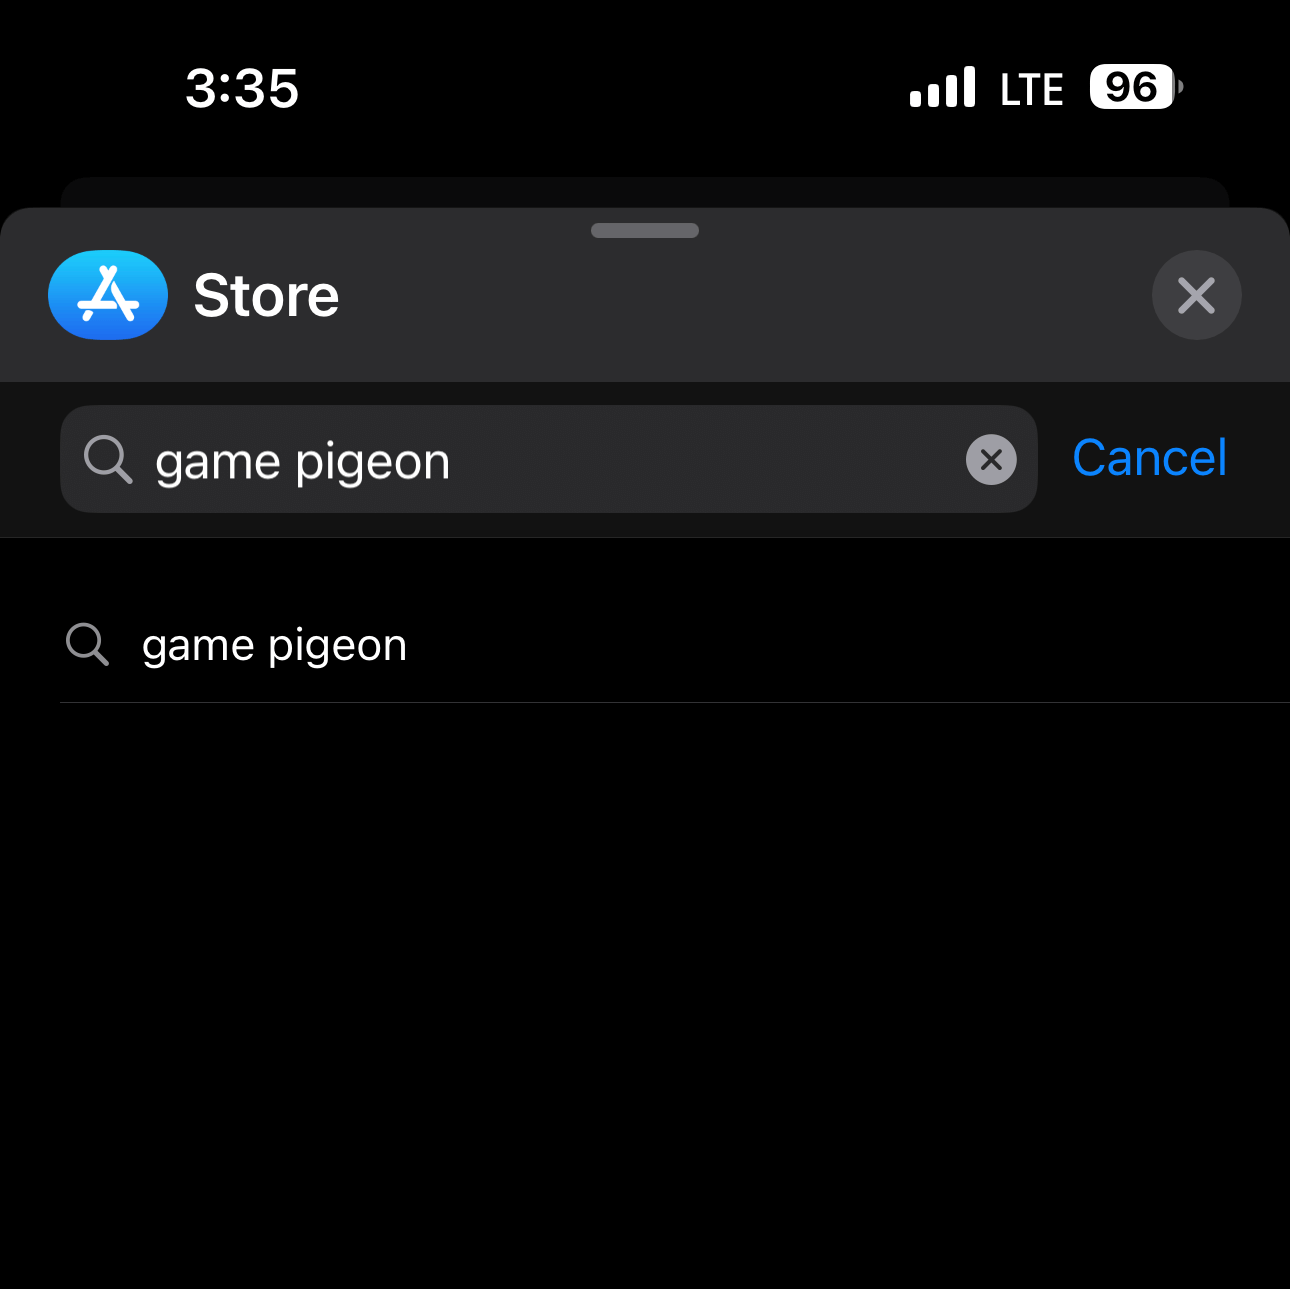 Enter Game Pigeon to find the app 